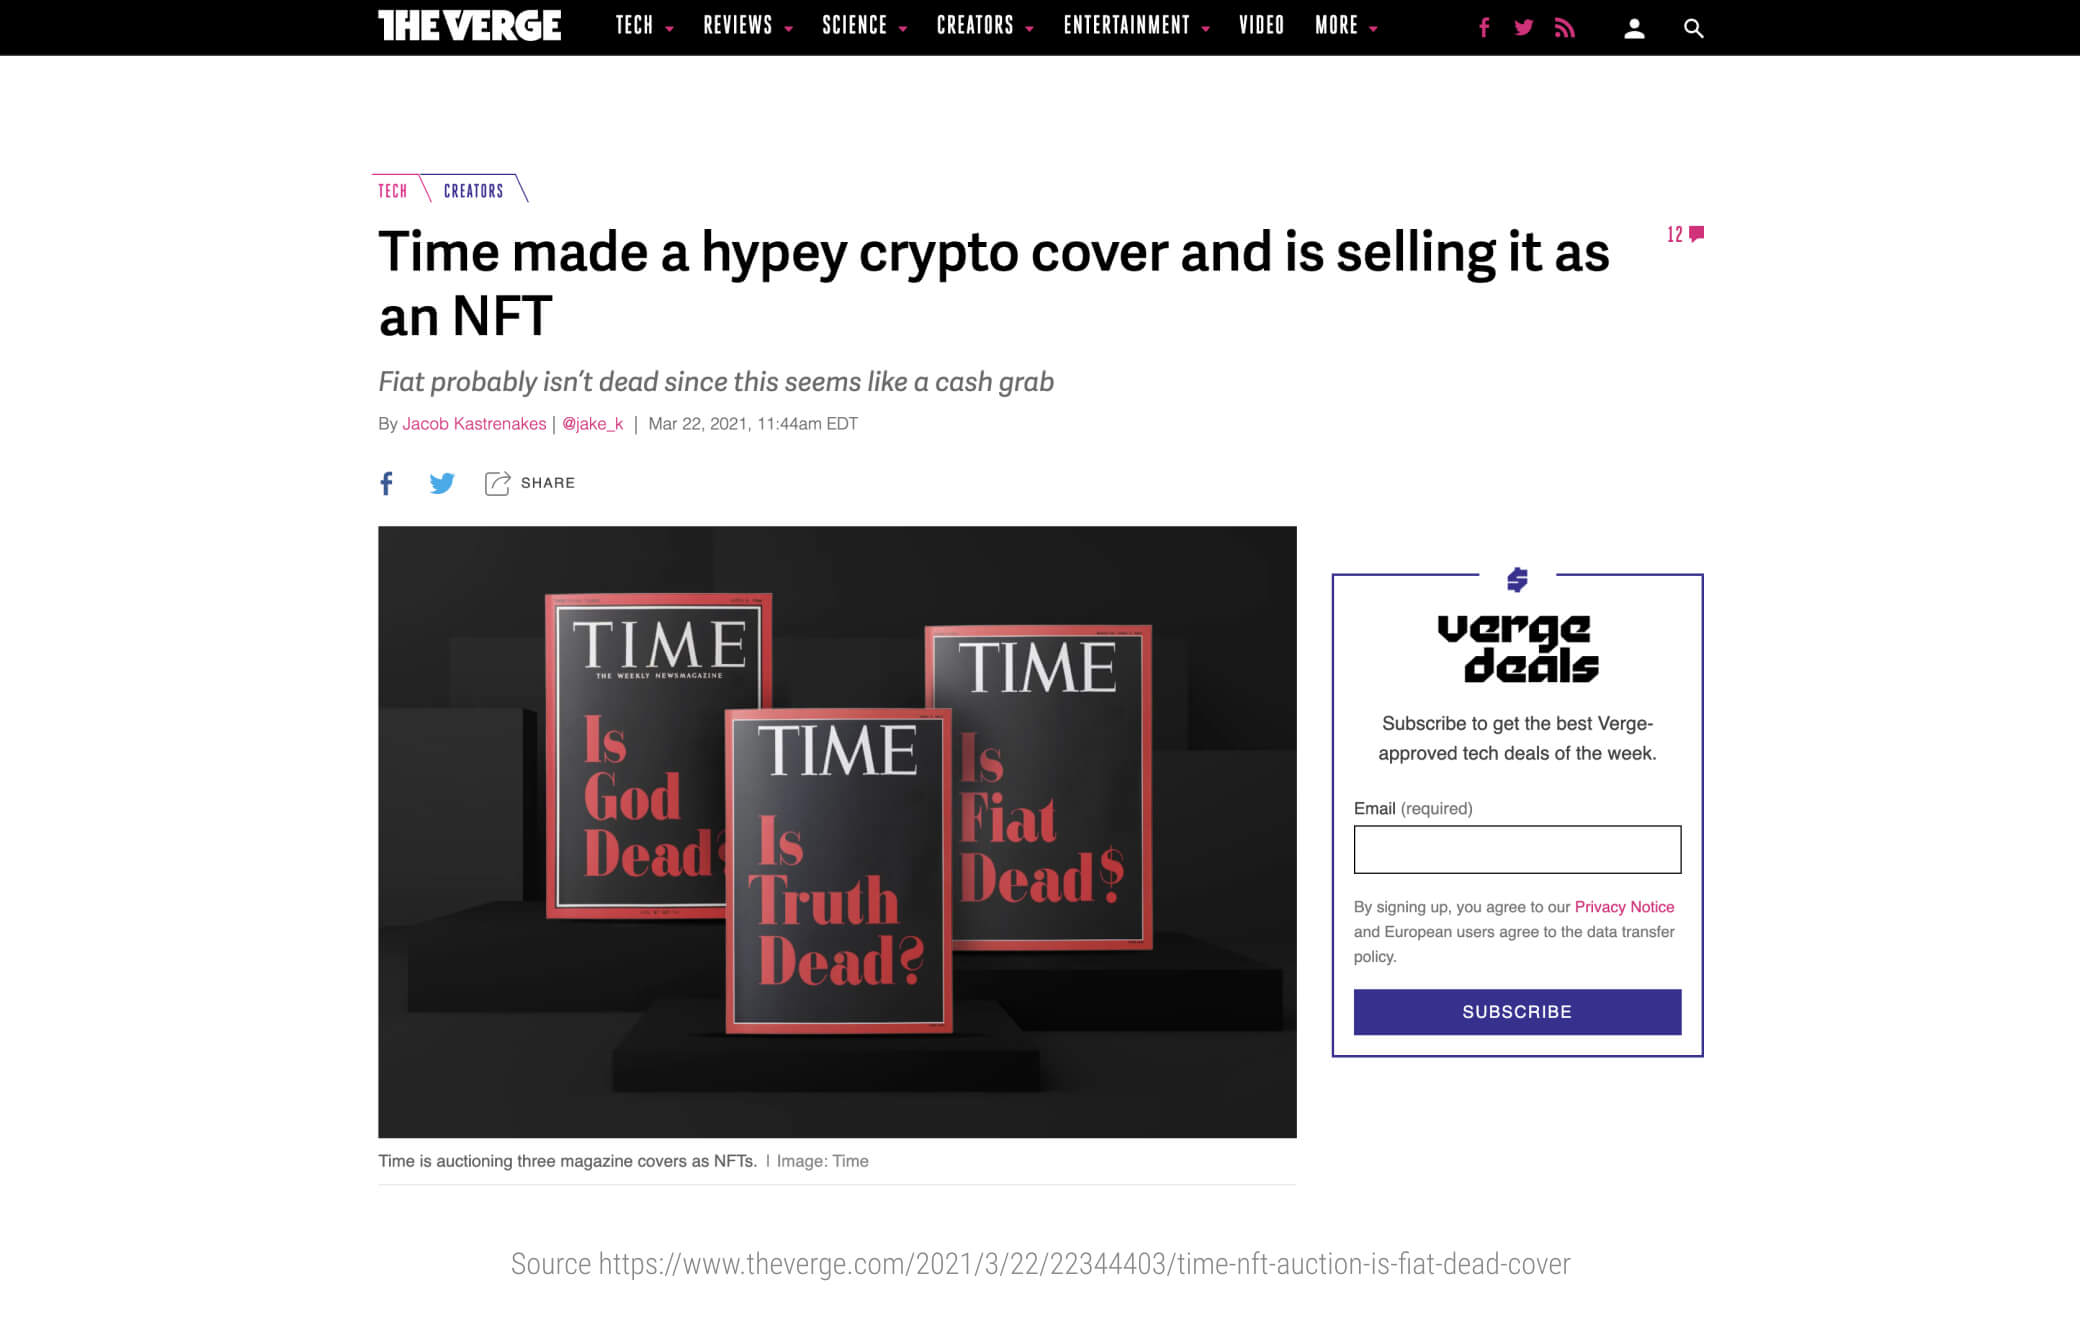 Time-made-a-hypey-crypto-cover-and-is-selling-it-as-an-NFT